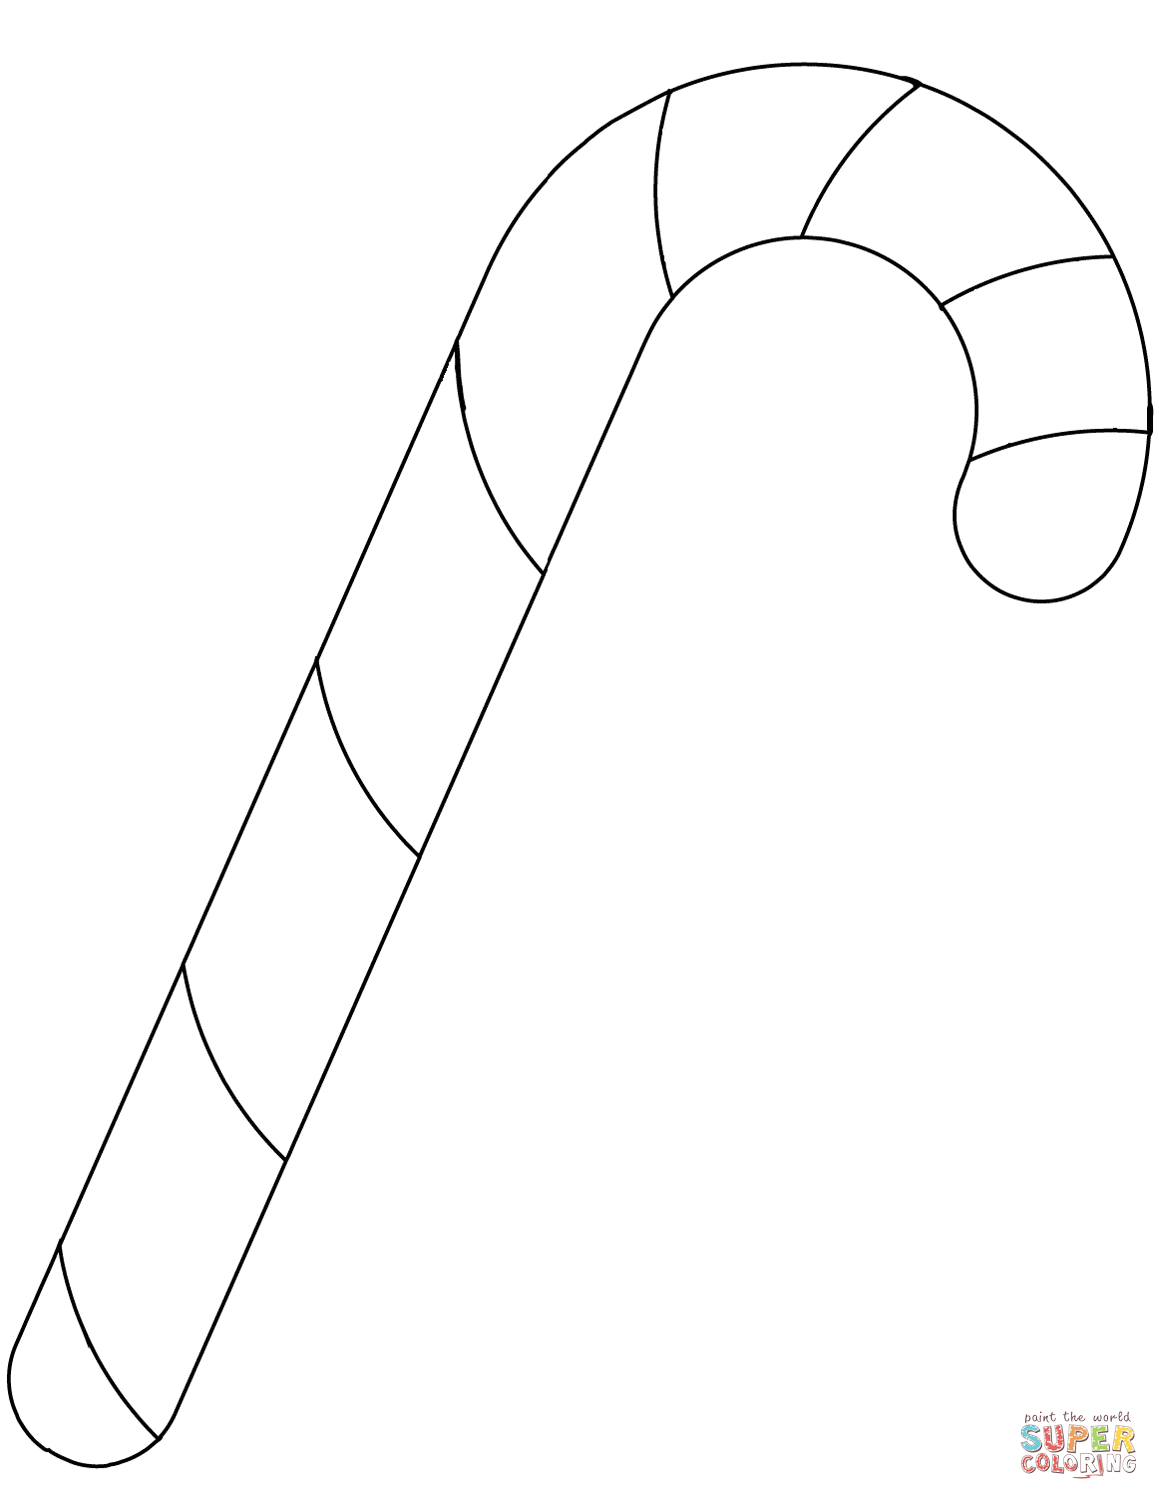 Free Candy Cane Template Printable Free Printable